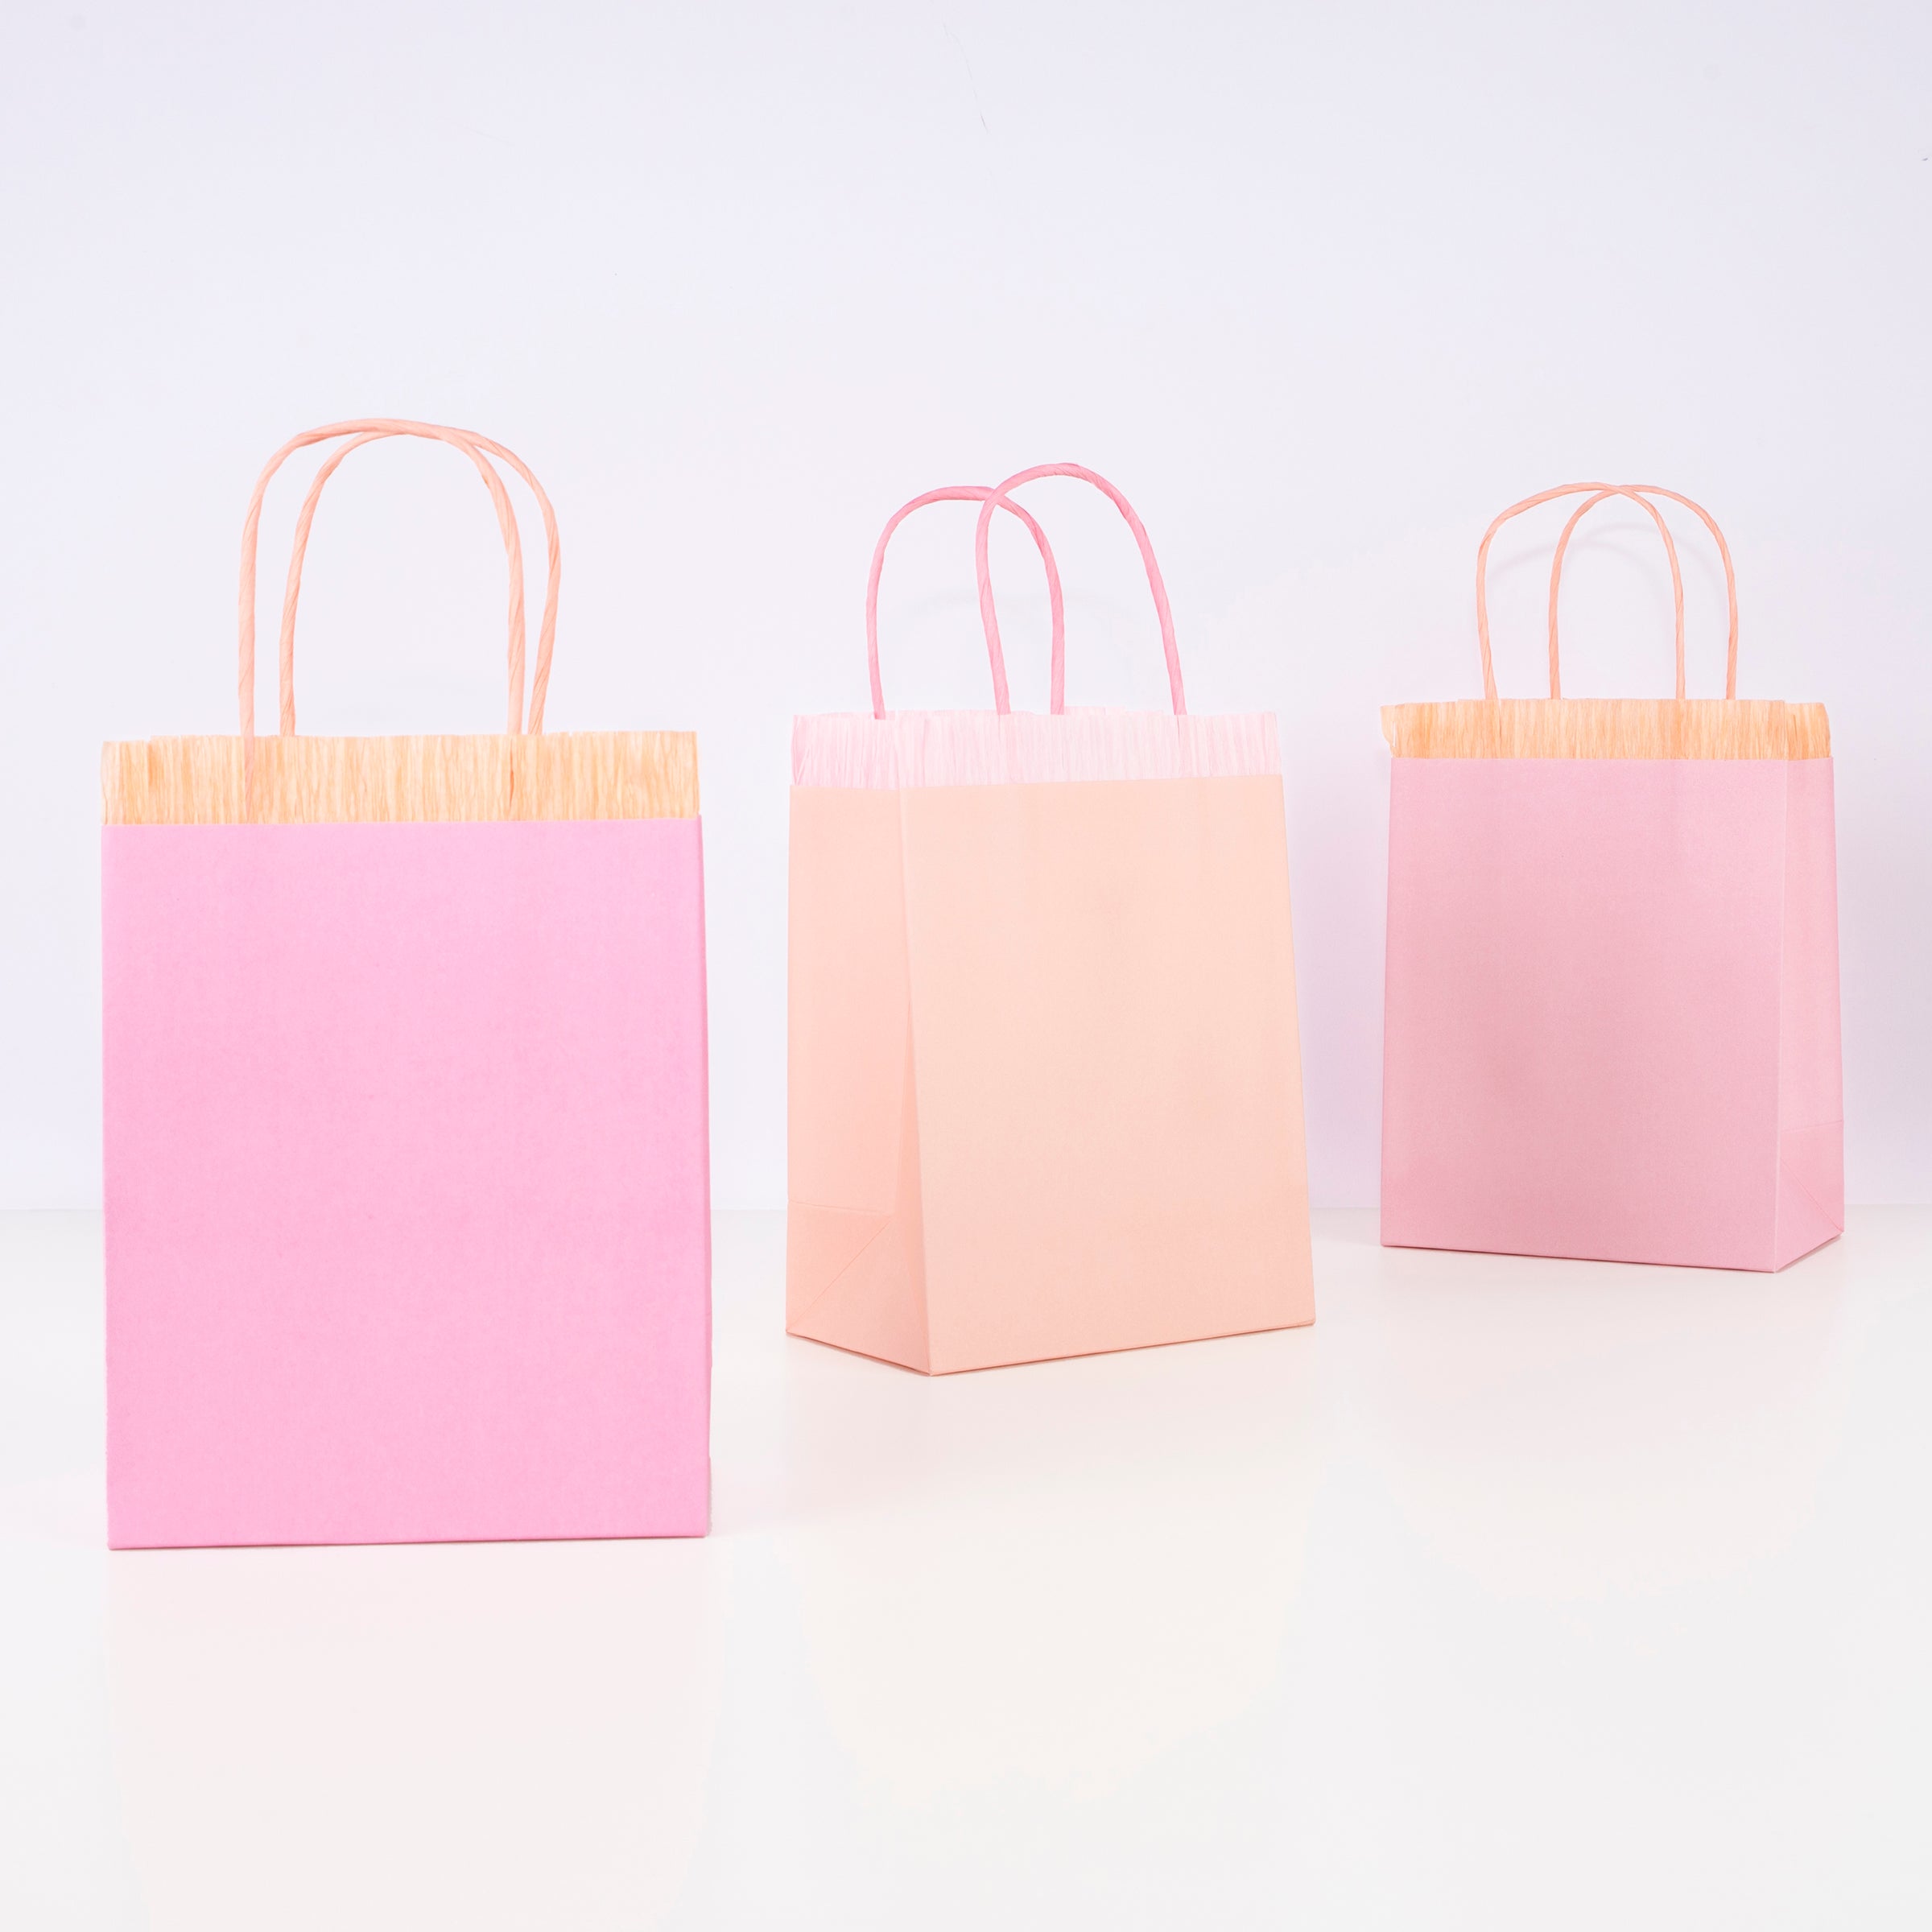 Our pink fringed bags are perfect as paper gift bags and party gift bags.